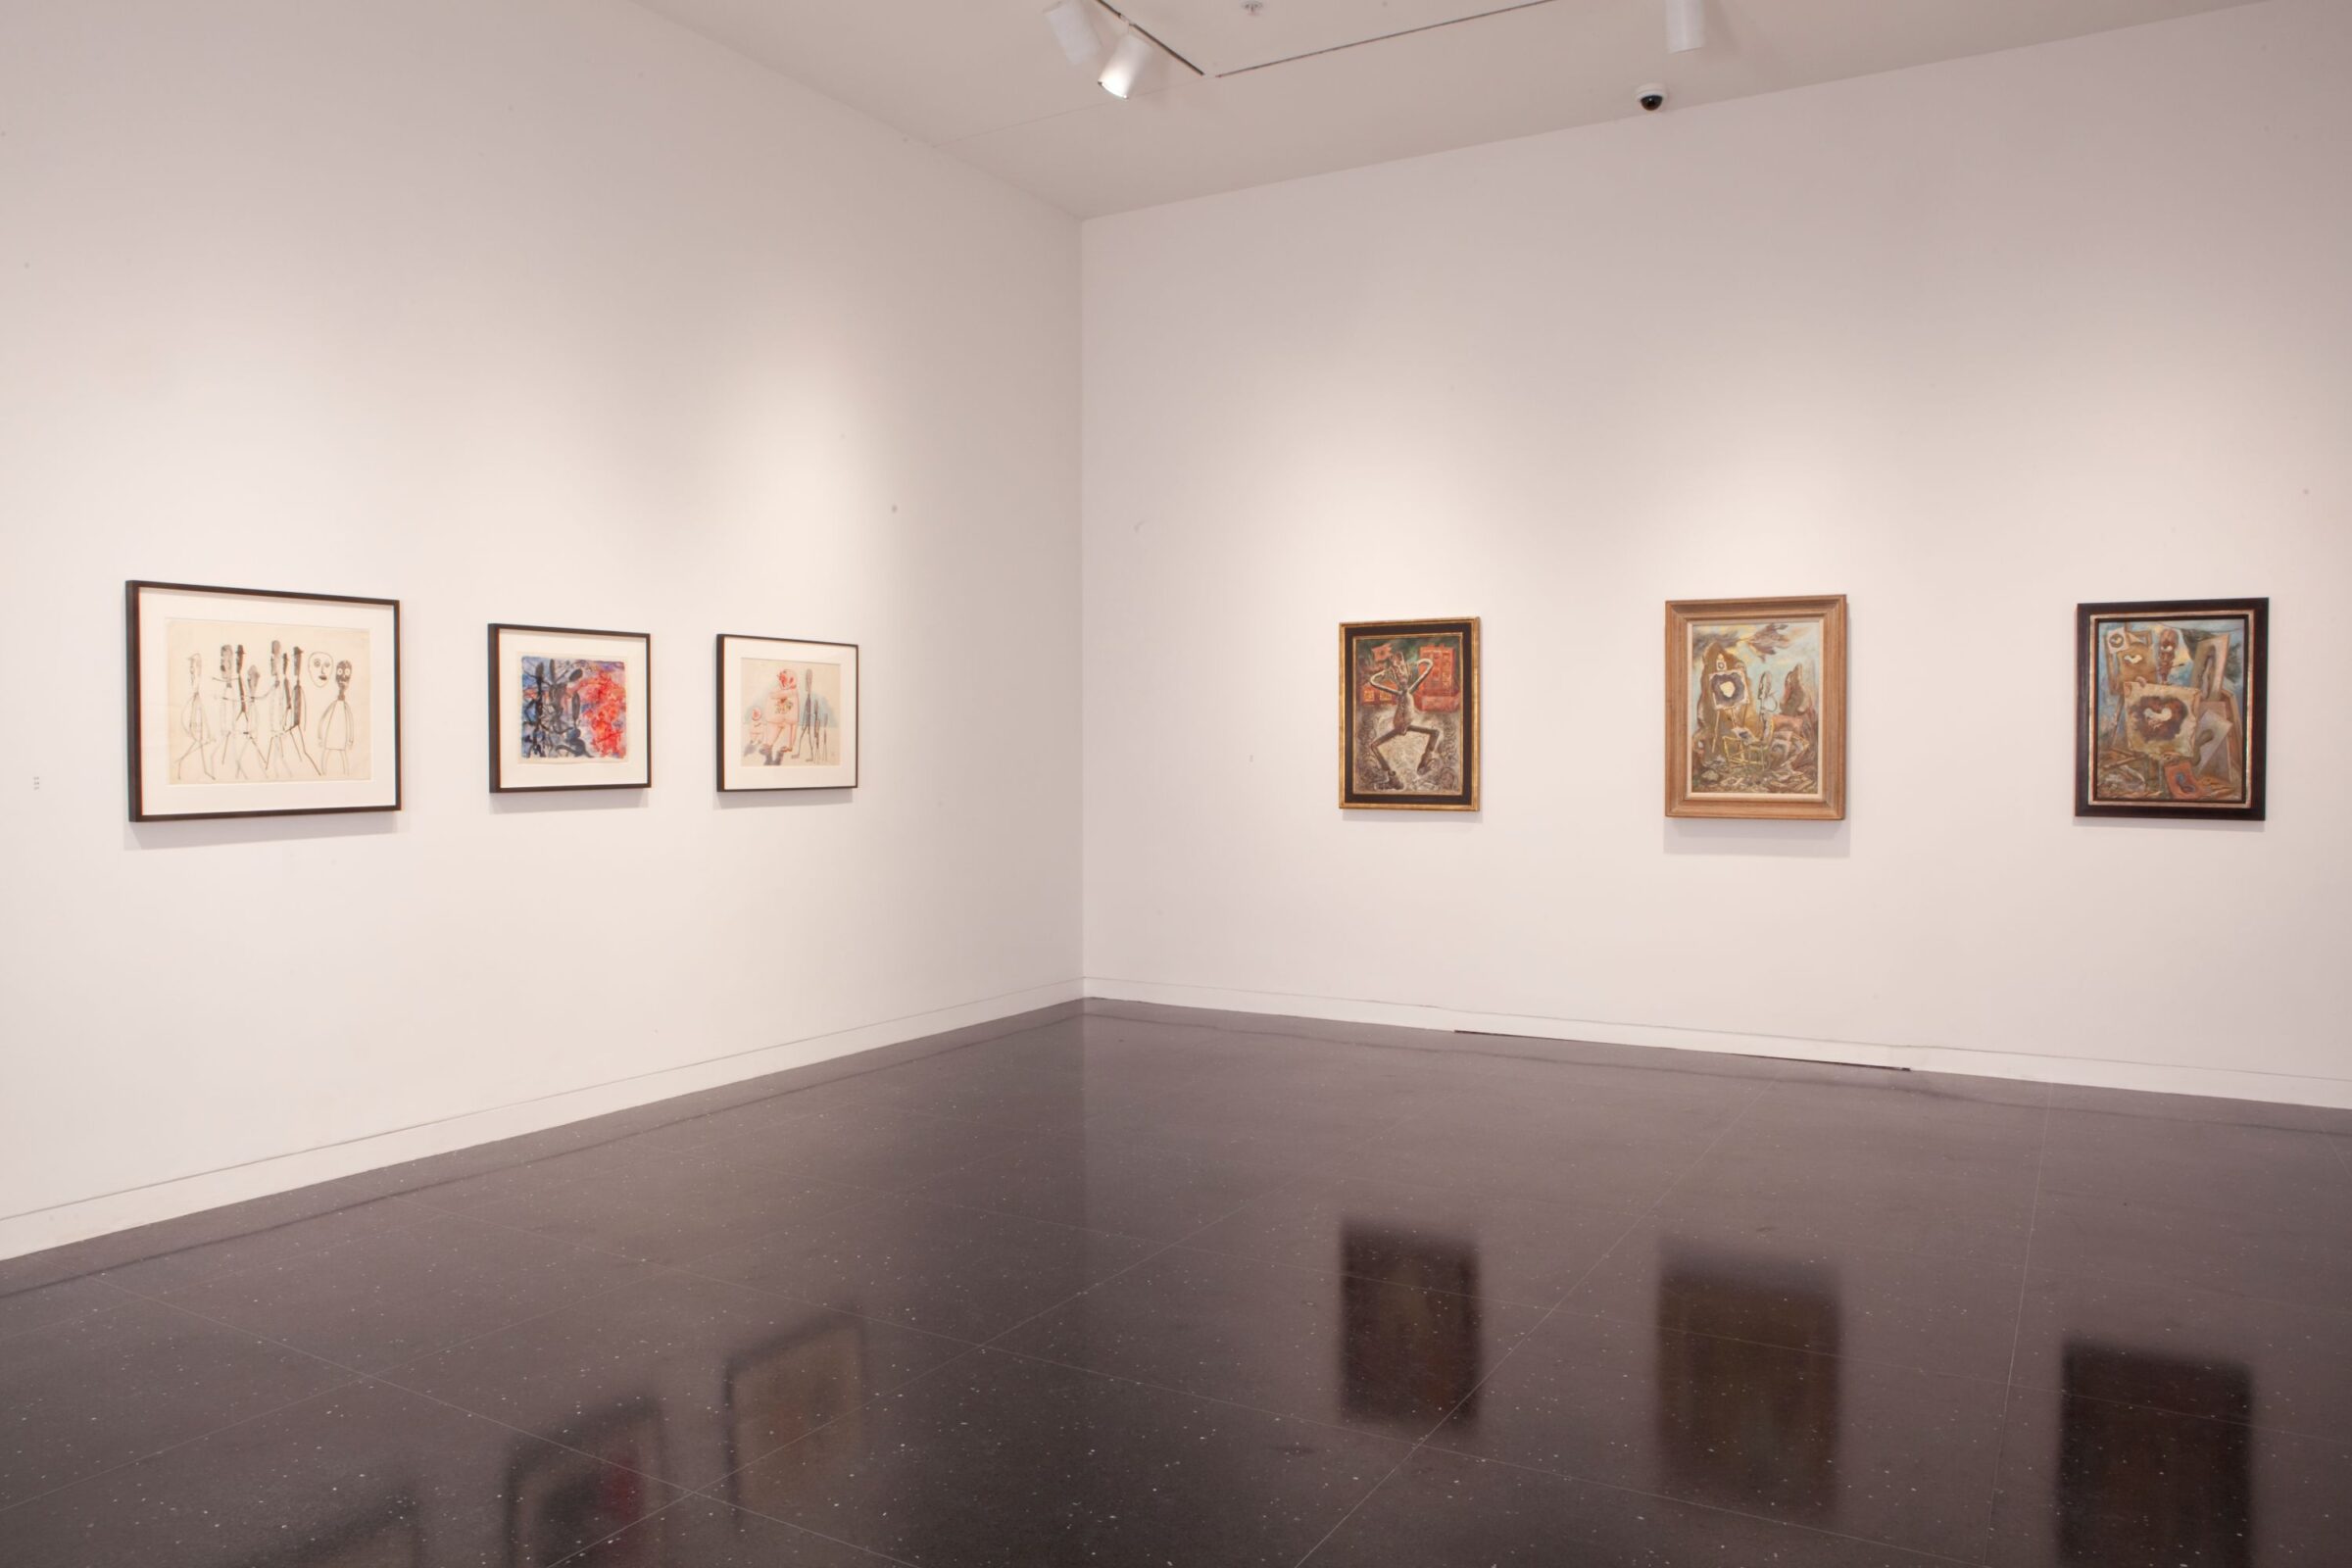 A white gallery space where six framed artworks hang in a row. To the viewer's right are three drawings in black frames and to the right are three surrealist paintings of a figure in different frenzied scenes are framed and hanging in a row